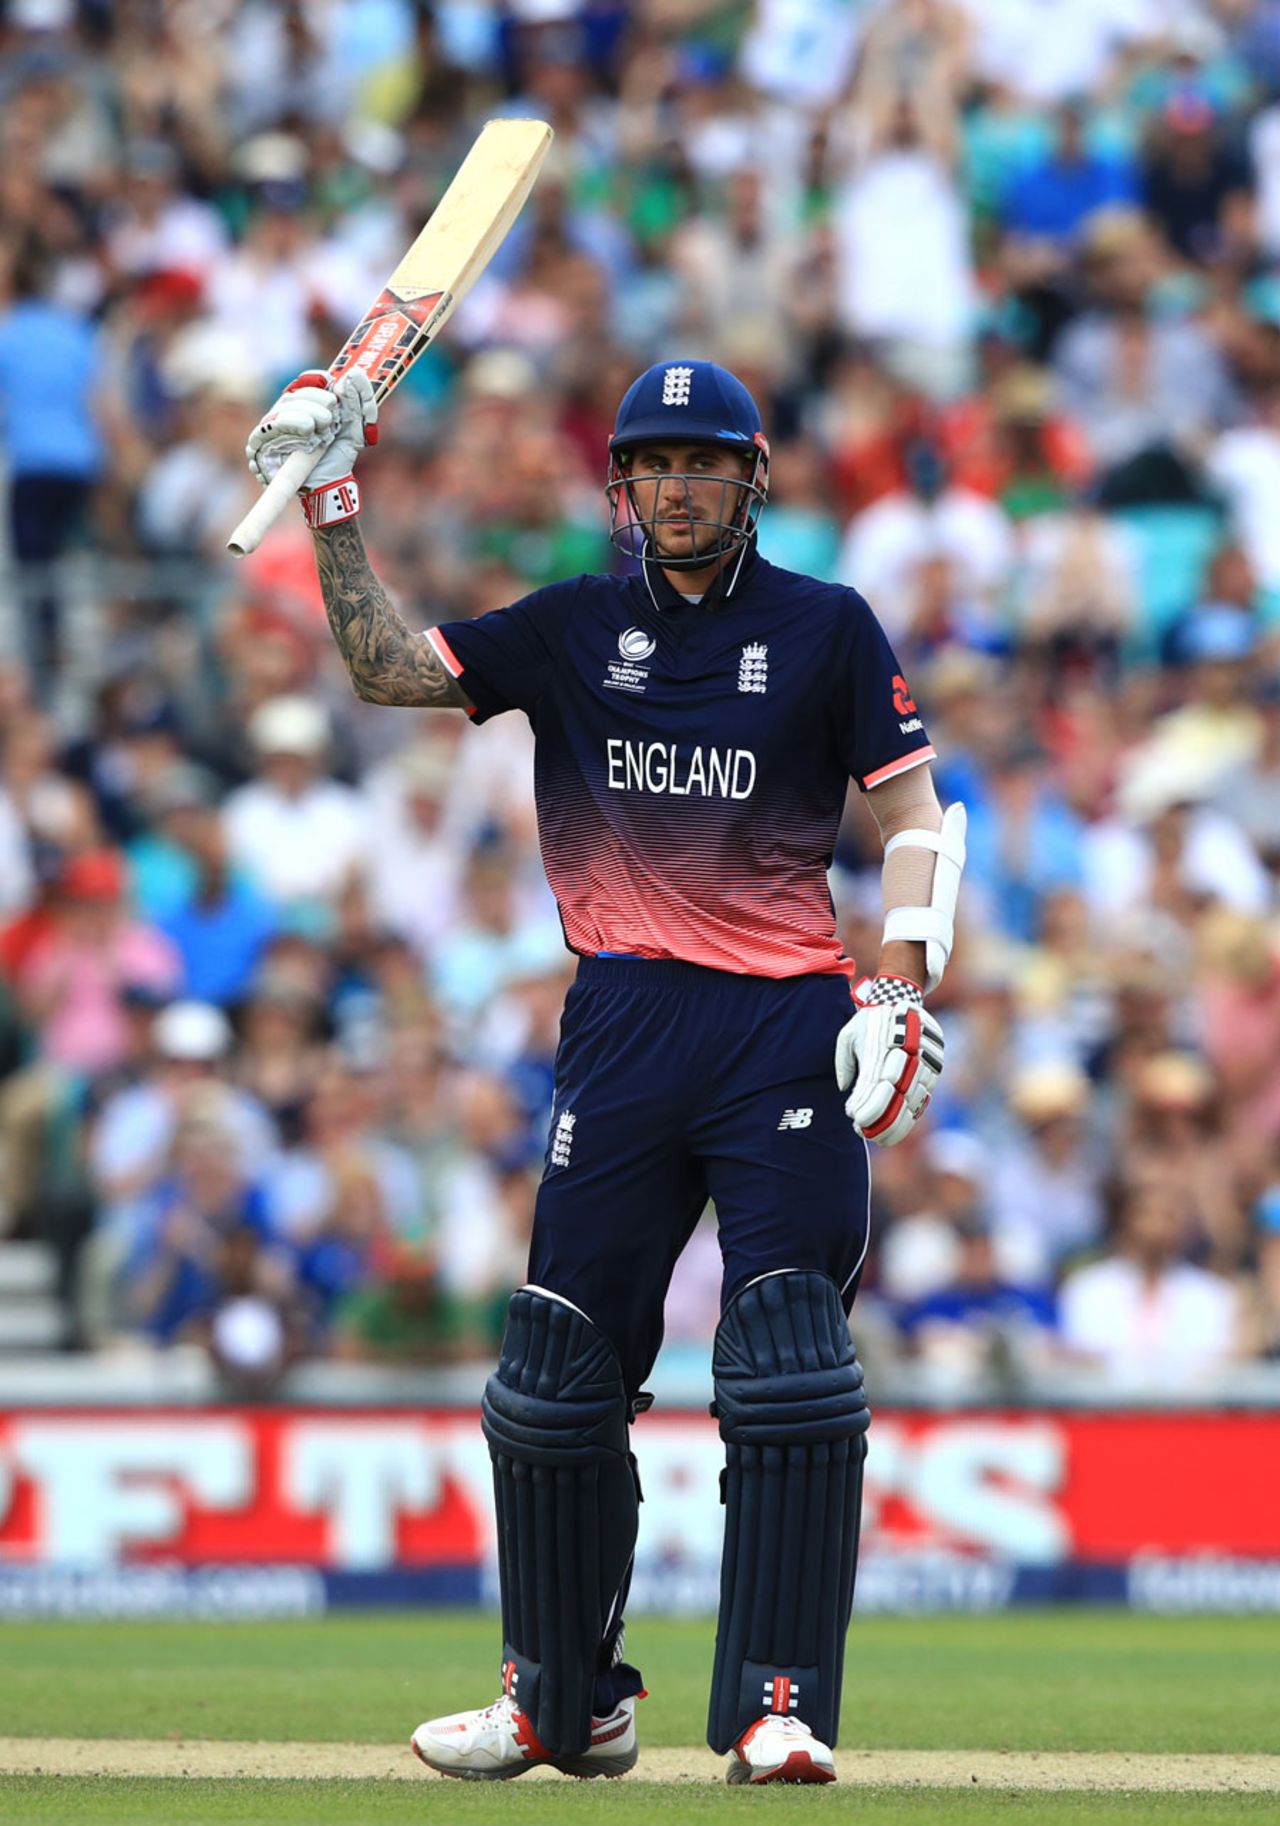 Alex Hales raised his half-century from 52 balls, England v Bangladesh, Champions Trophy, Group A, The Oval, June 1, 2017